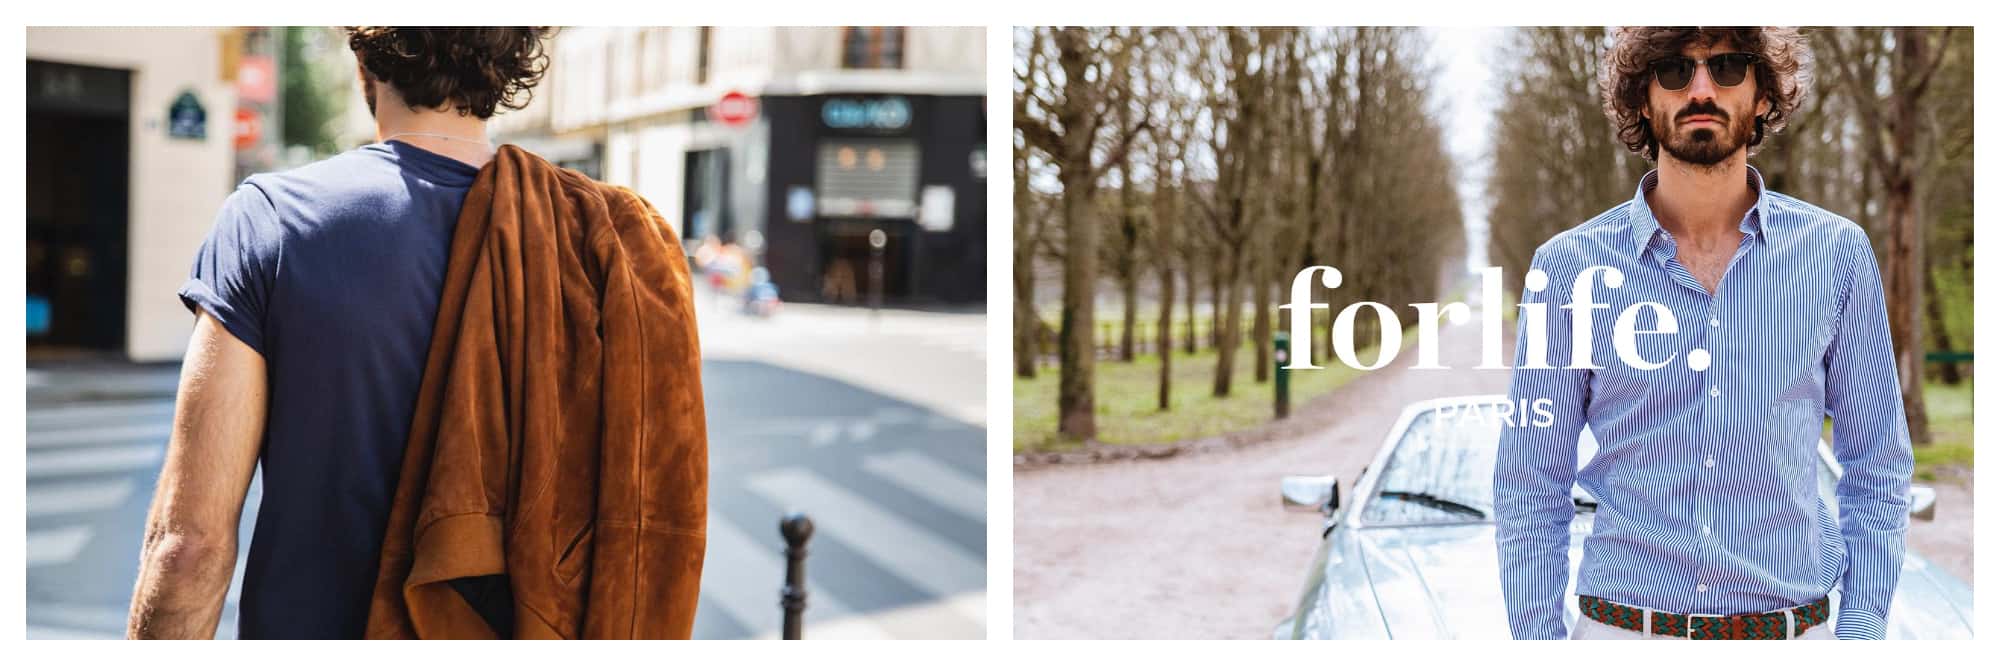 On left: a male model causally crosses a street in Paris with his brown suede jacket slung over his shoulder, designed by the ethical French fashion brand forlife. On right: a campaign poster for the ethical French fashion brand forlife. A male model stands in front of a vintage car on a beautiful but deserted country road. He wears a blue and white striped button down and dark sunglasses. 